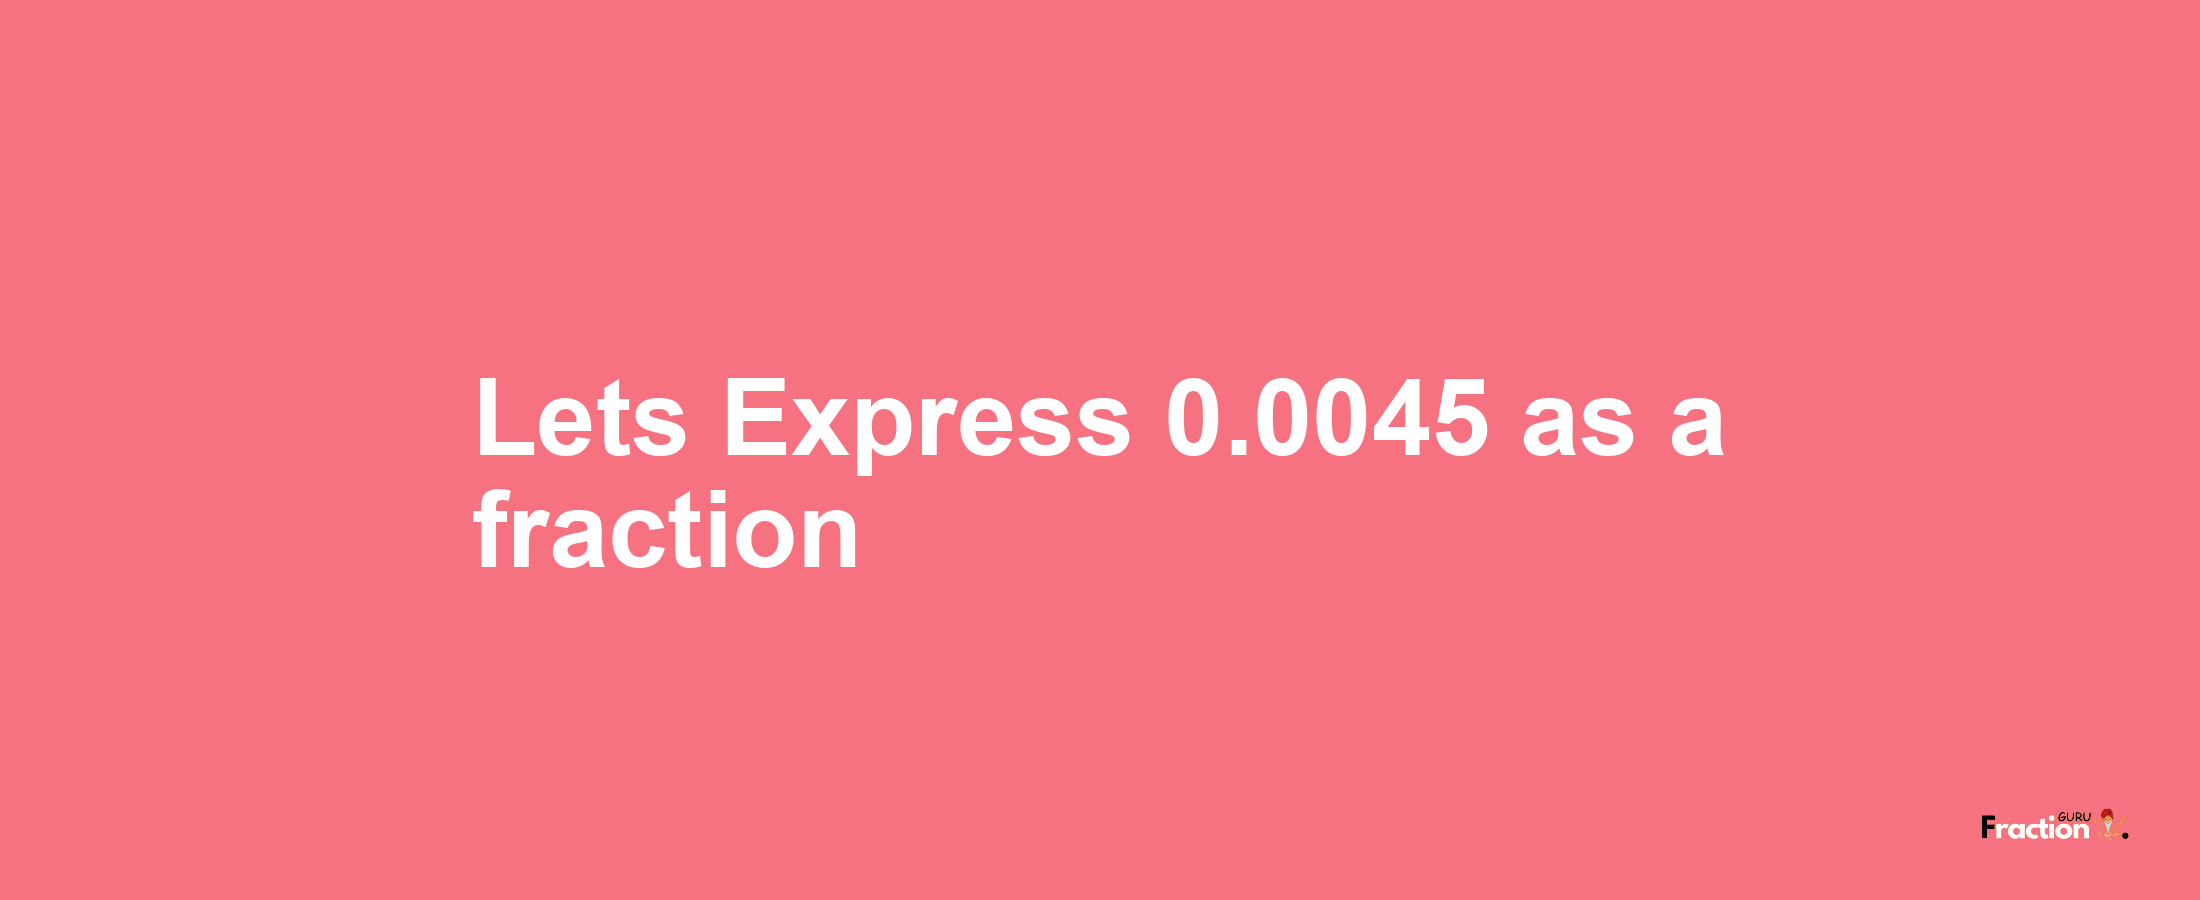 Lets Express 0.0045 as afraction